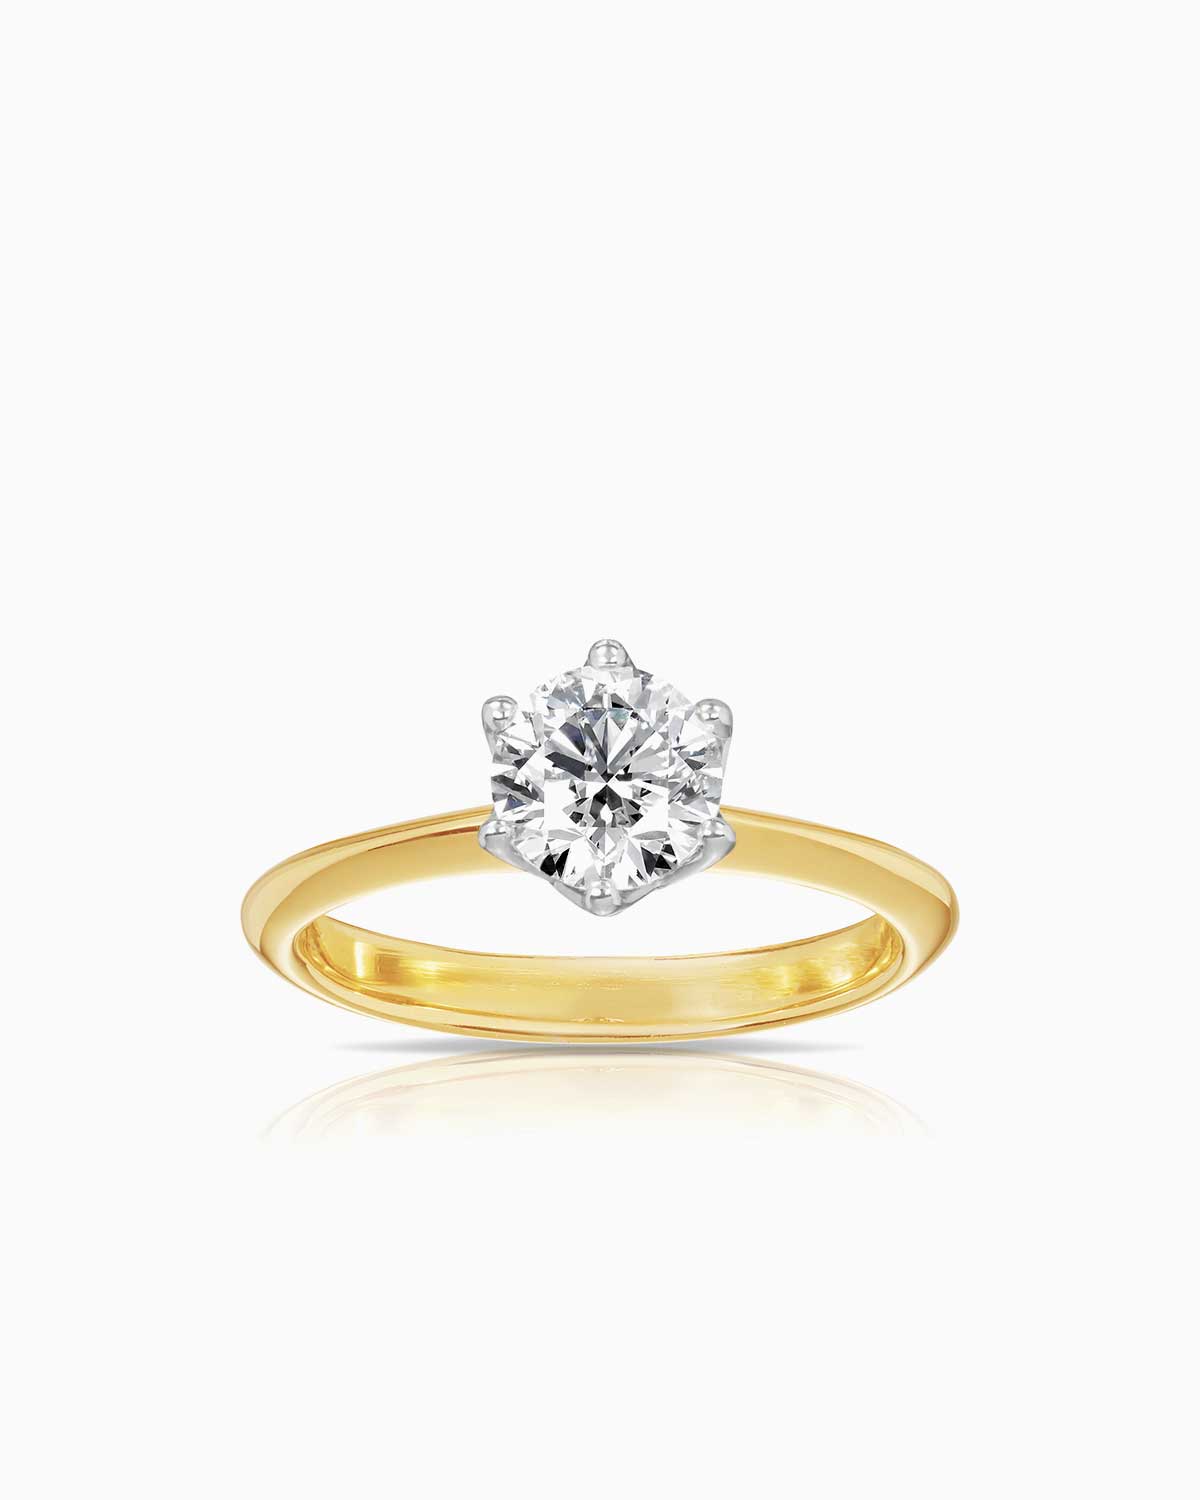 Round 6 claw basket solitaire engagement ring featuring 18 karat yellow and white gold by claude and me jewellery.